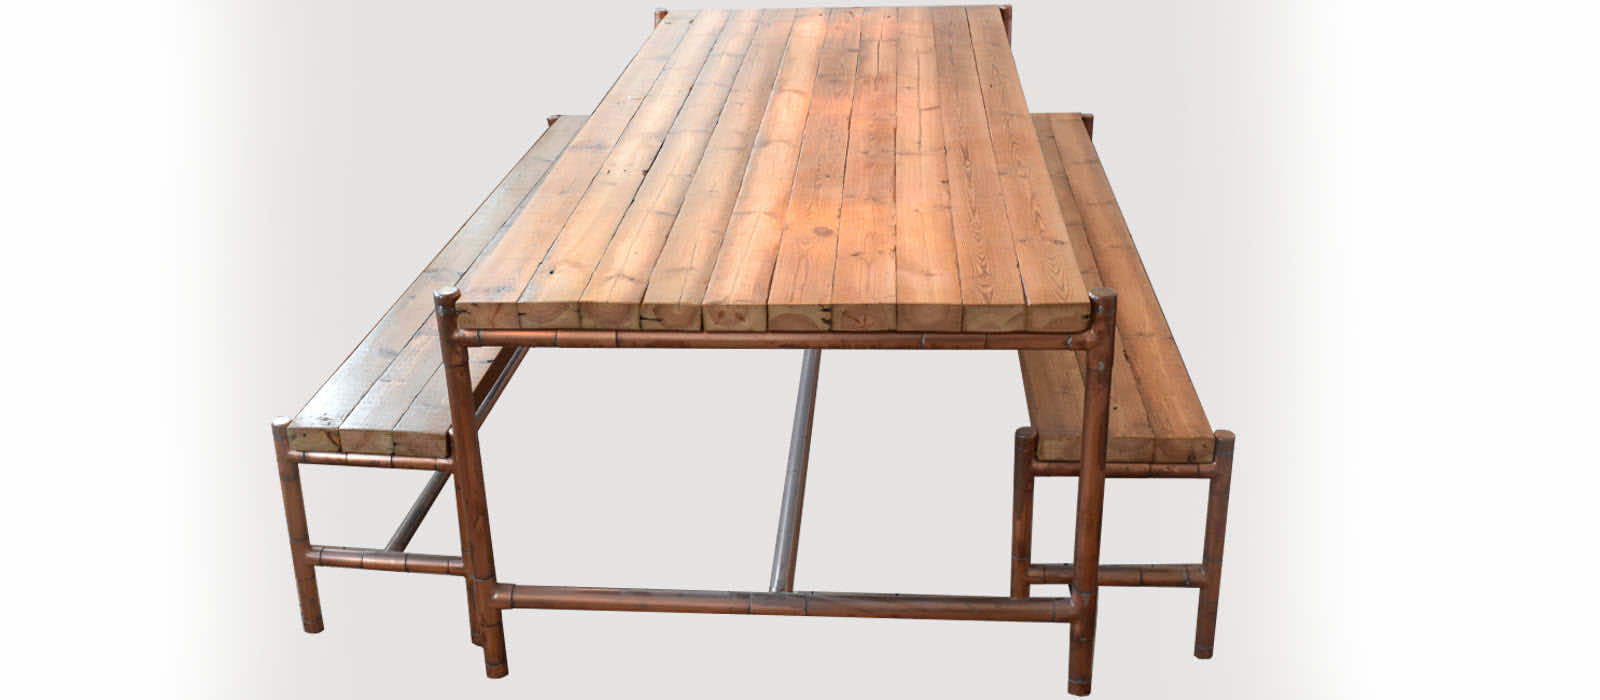 Central Meeting Table- copper table- reclaimed timbers